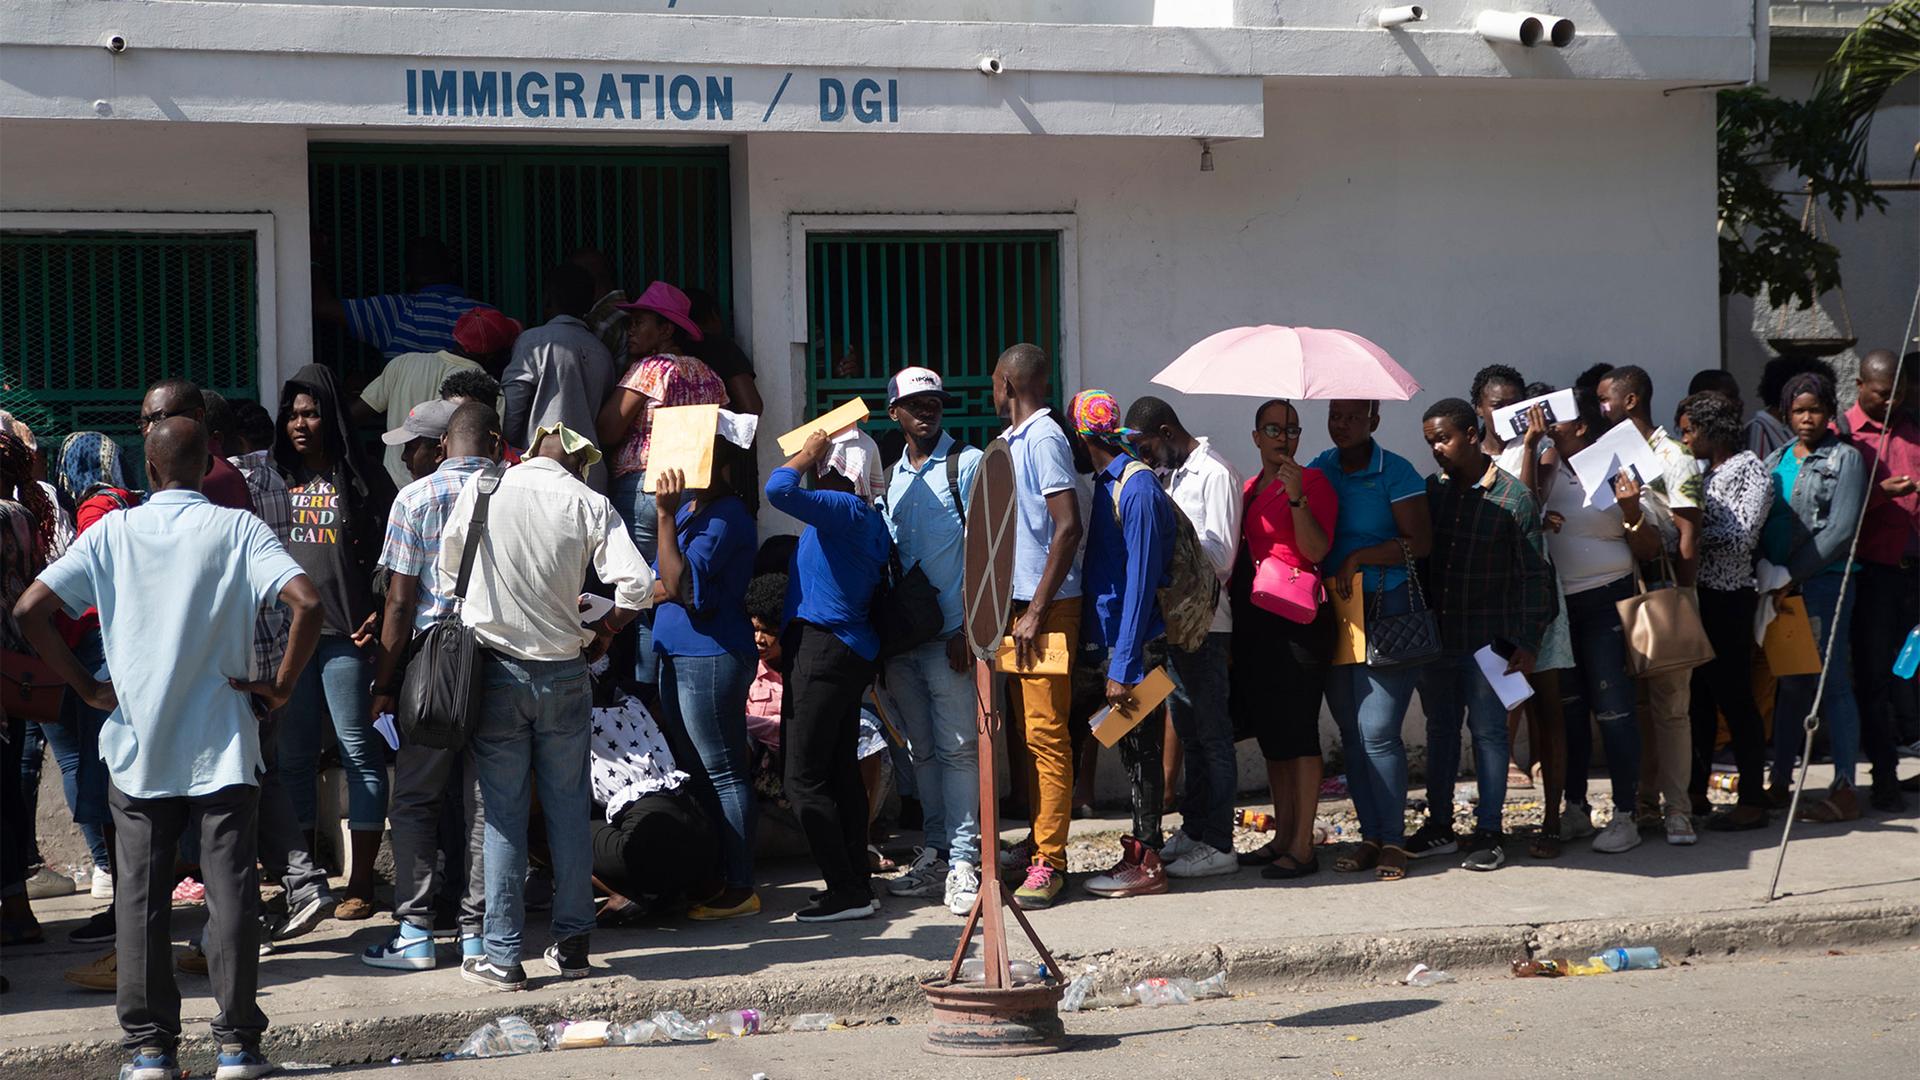 Haitians line up outside an immigration office as they wait their turns to apply for a passport, in Port-au-Prince, Haiti, Jan. 10, 2023.